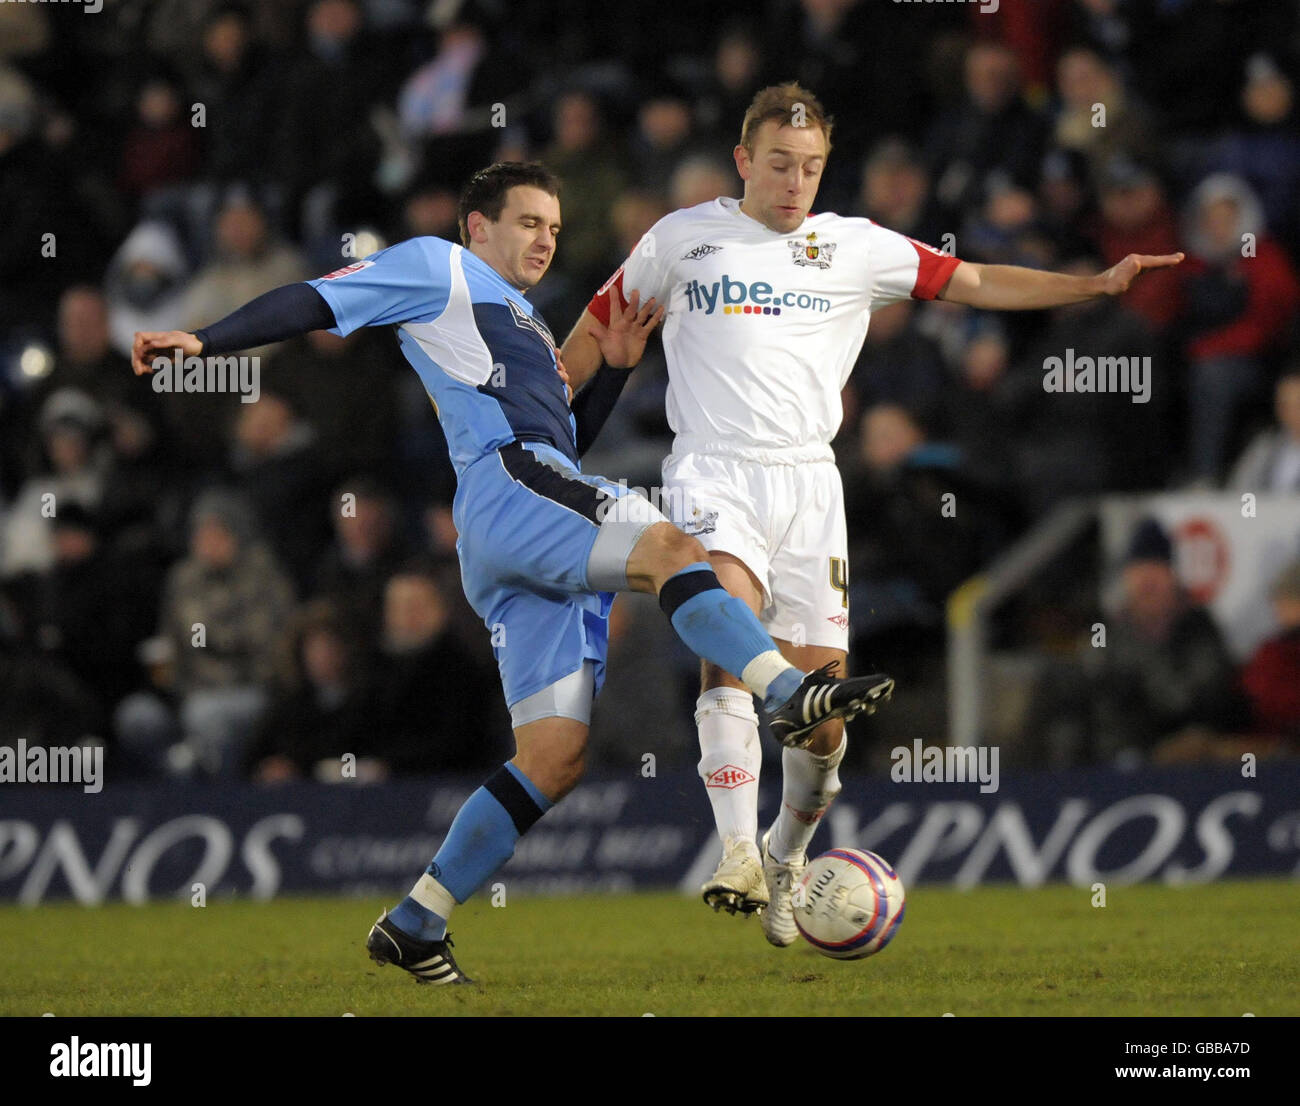 Wycombe's David McCracken and Exeter's Matt Gill battle for the ball during the Coca-Cola League Two match at Adams Park, High Wycombe. Stock Photo